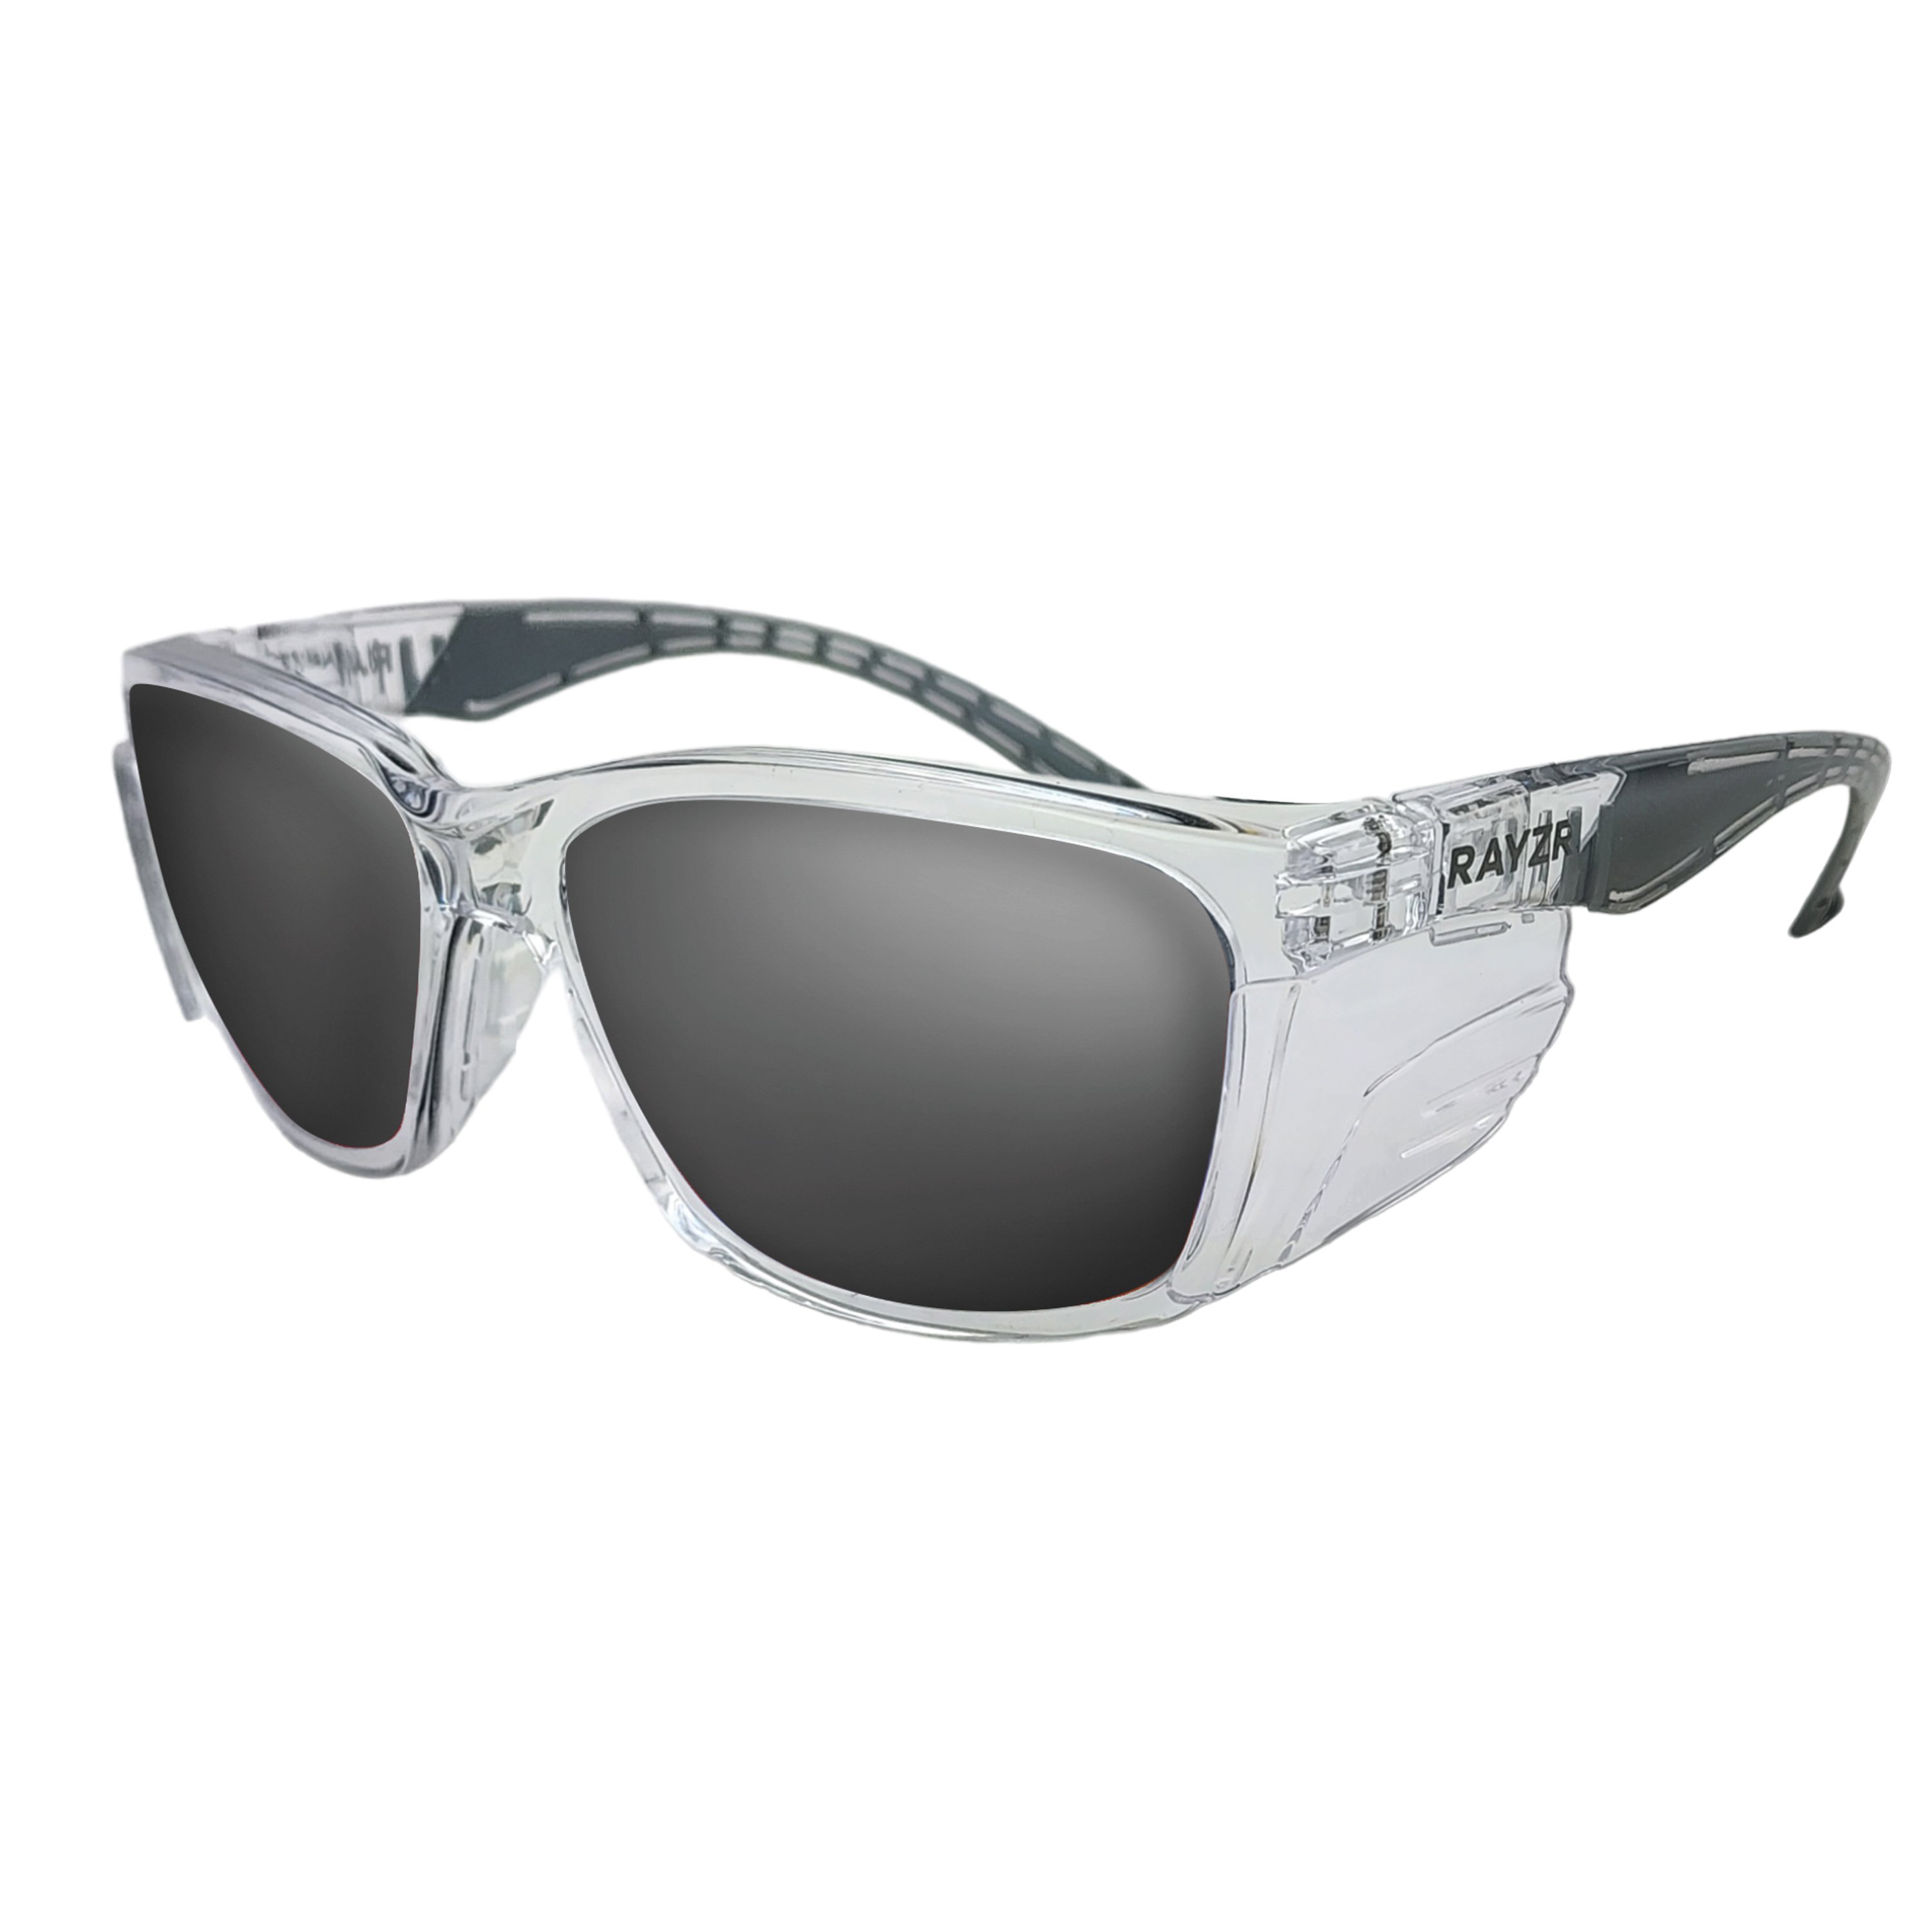 RAYZR SAFETY GLASSES - SMOKE LENS - CLEAR FRAME